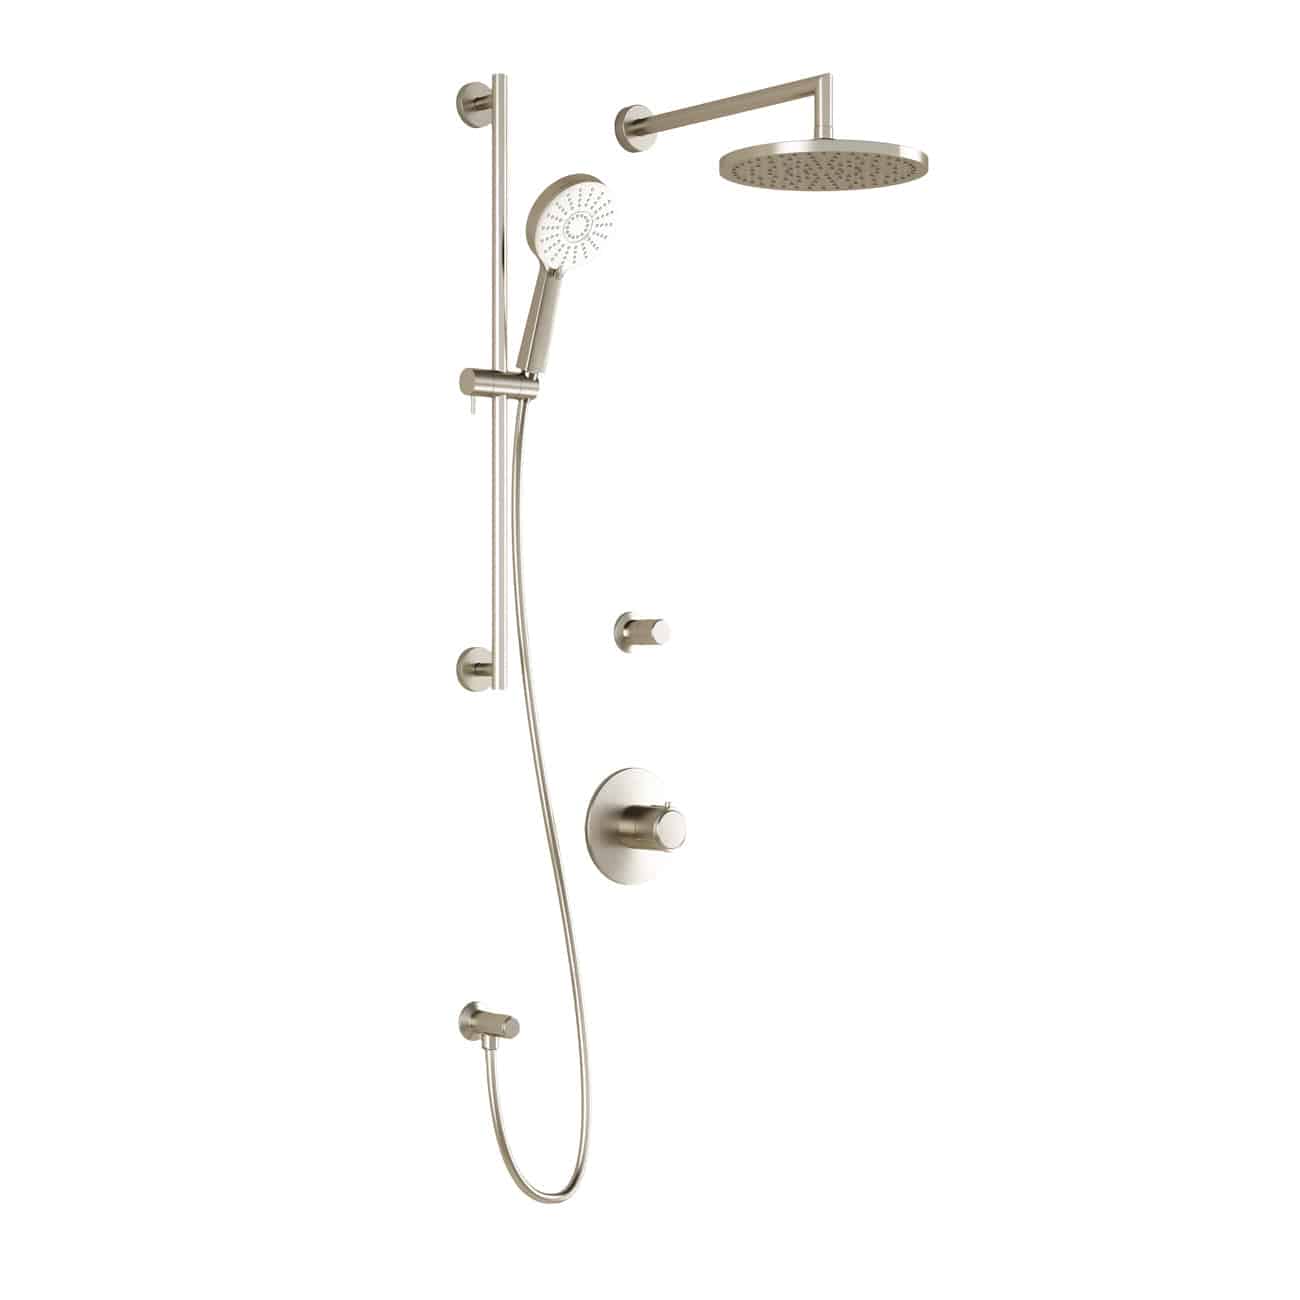 Kalia CITÉ T2 PLUS AQUATONIK T/P Shower Kit System with Wall Arm and 10" Round Rain Shower Head- Brushed Nickel PVD